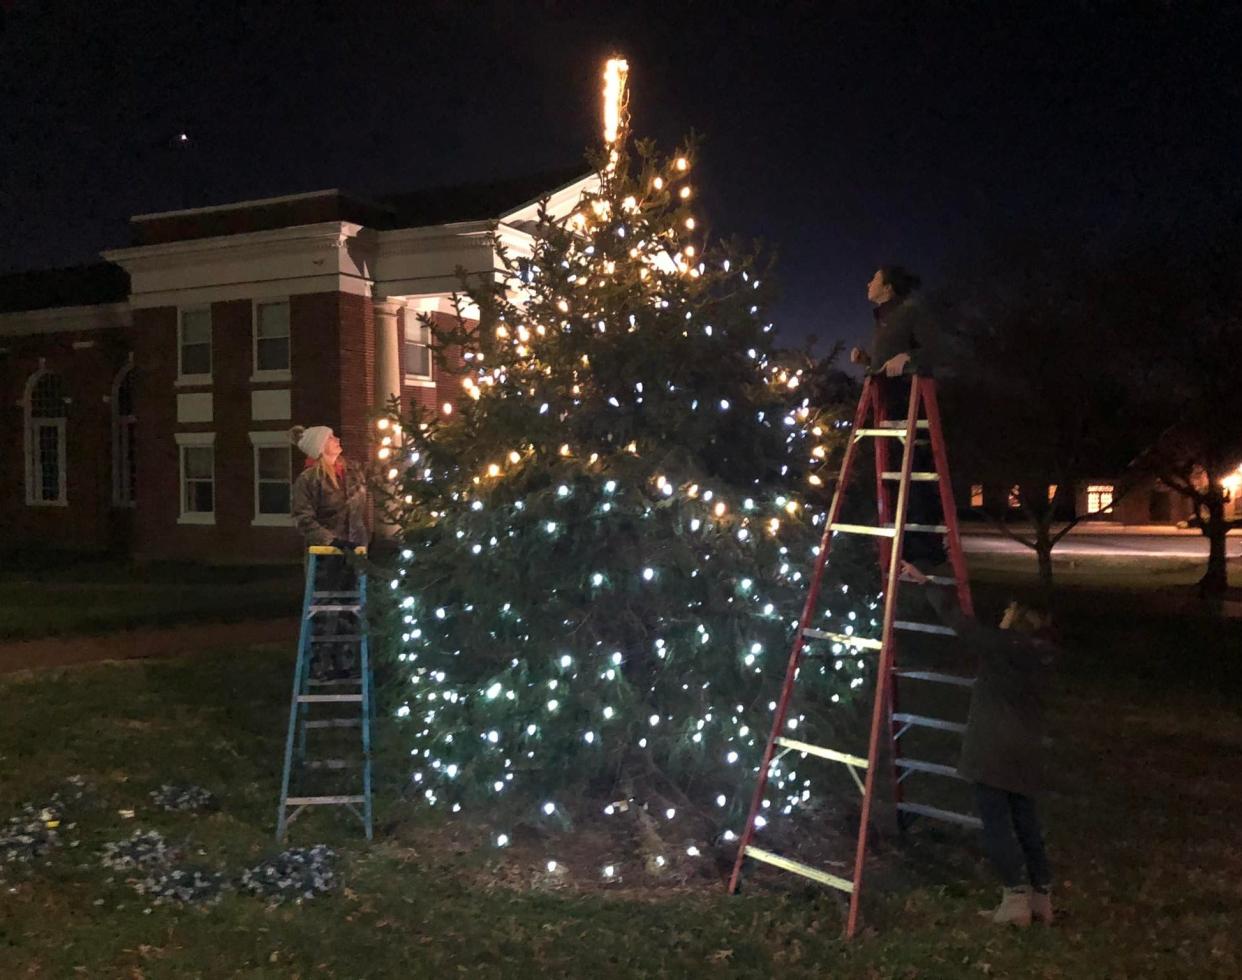 Volunteers decorate the Christmas tree on the Courthouse Square in Amelia in December 2021.